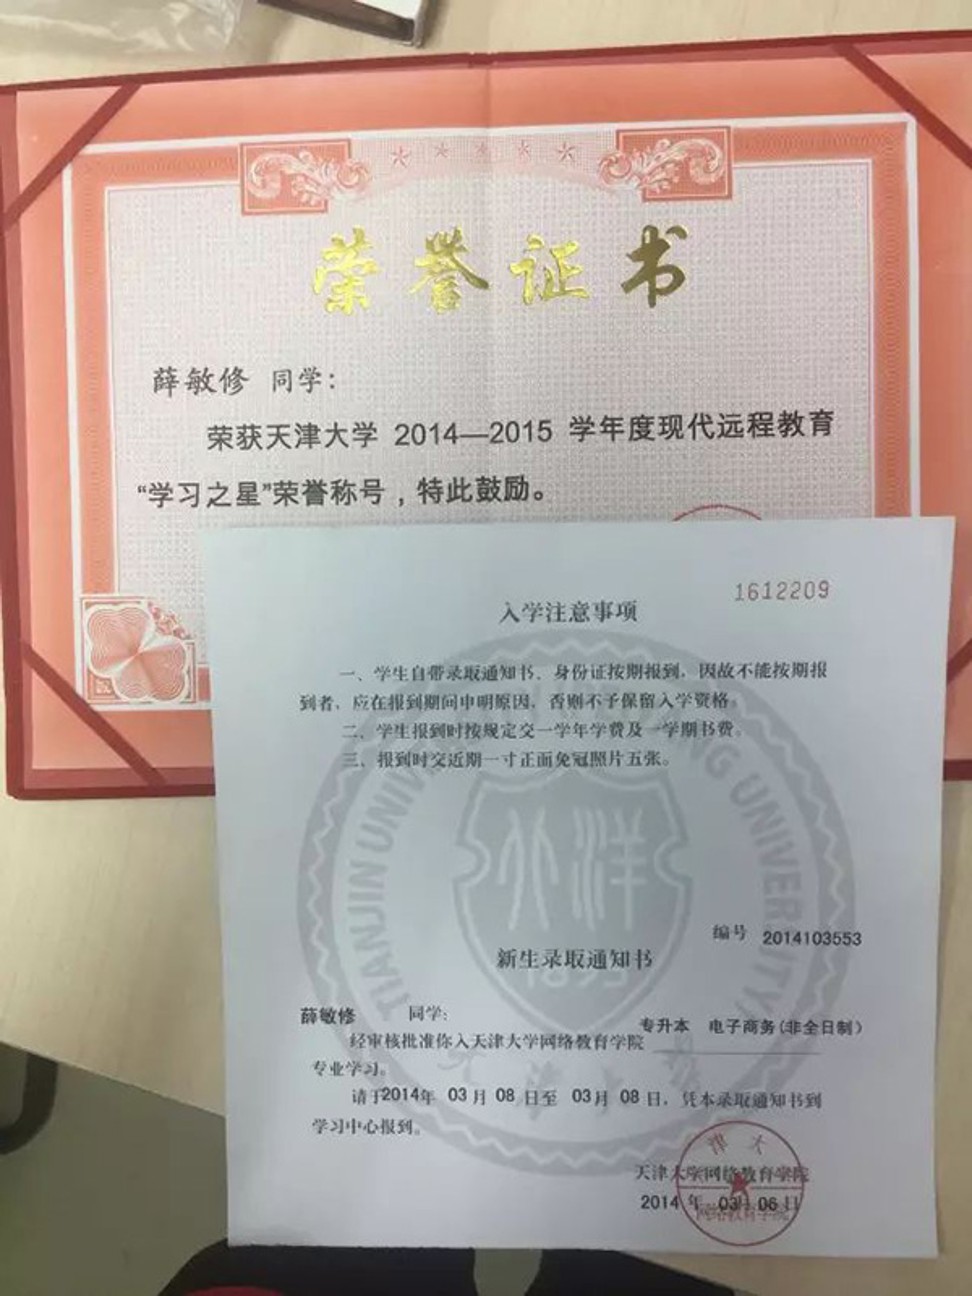 Xue, who was presented with her degree certificate (above) last month, said she needed six attempts to pass the computing element of the course. Photo: News.sina.com